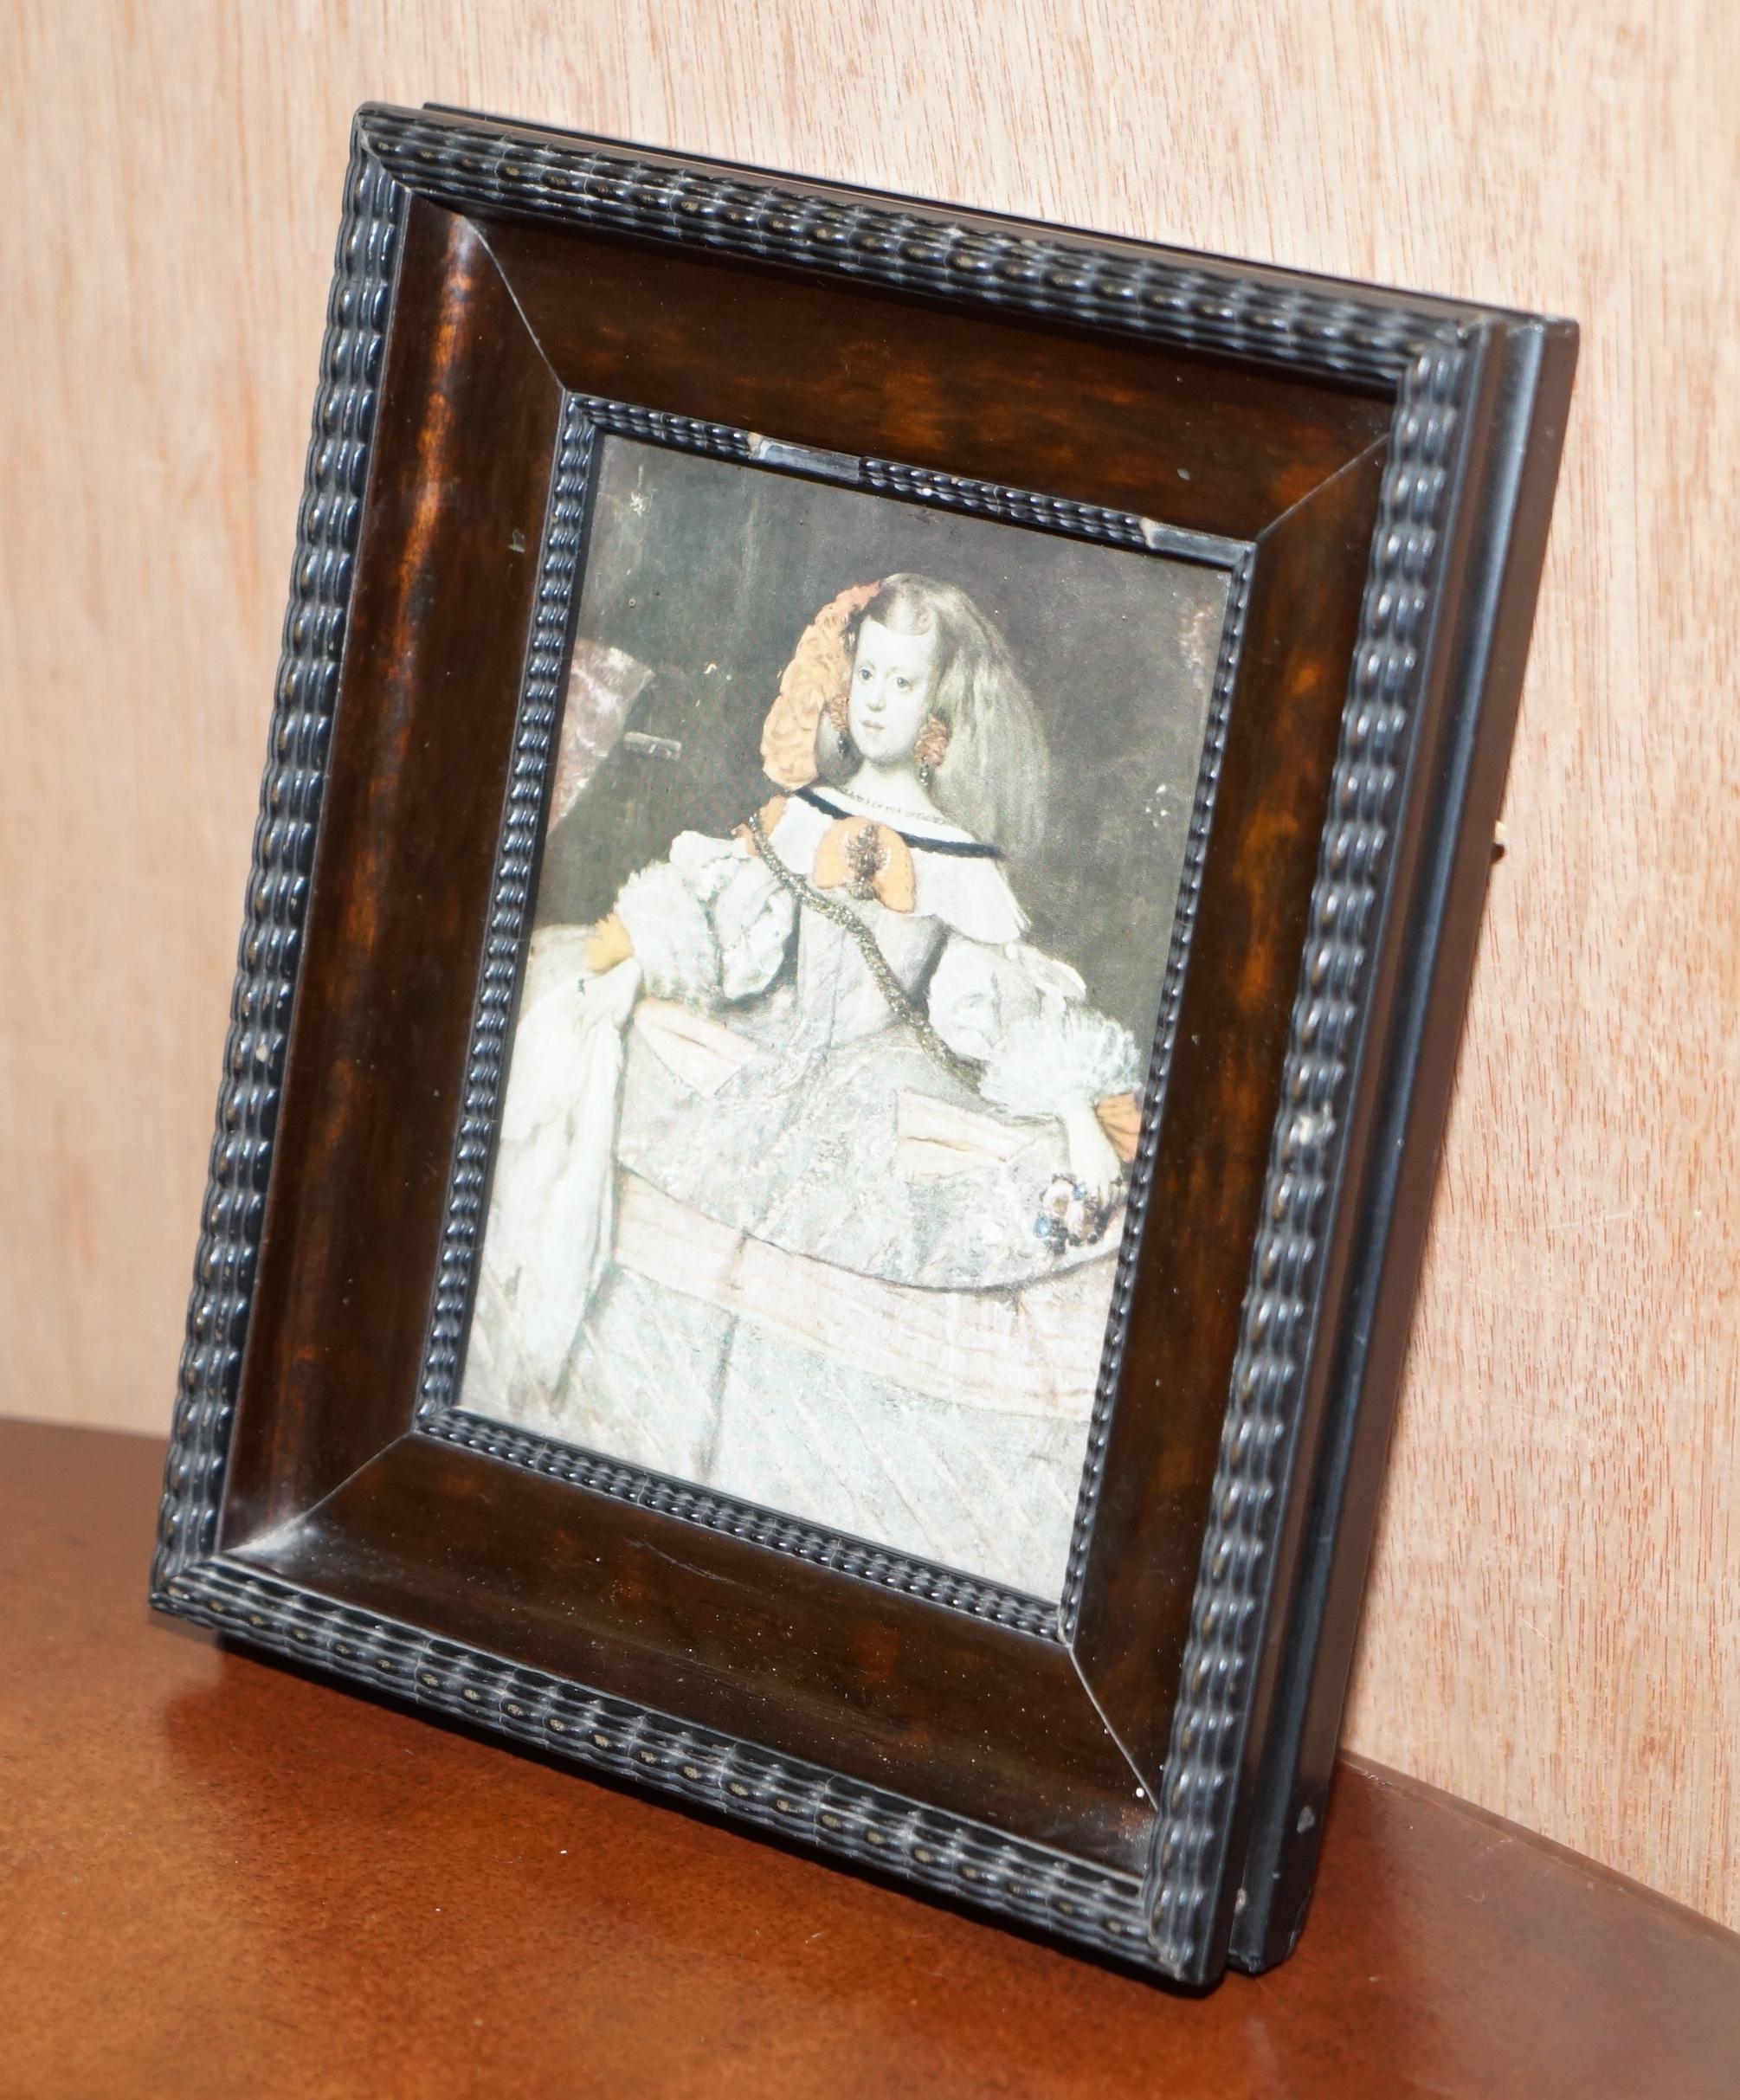 We are delighted to offer for sale this lovely Portrait of the Infanta Margarita Teresa Juan Bautista Martínez del Mazo (Queen of Spain)

A very sweet little picture, labelled to the back Vienna Imperial Gallery

The frame looks to be faux